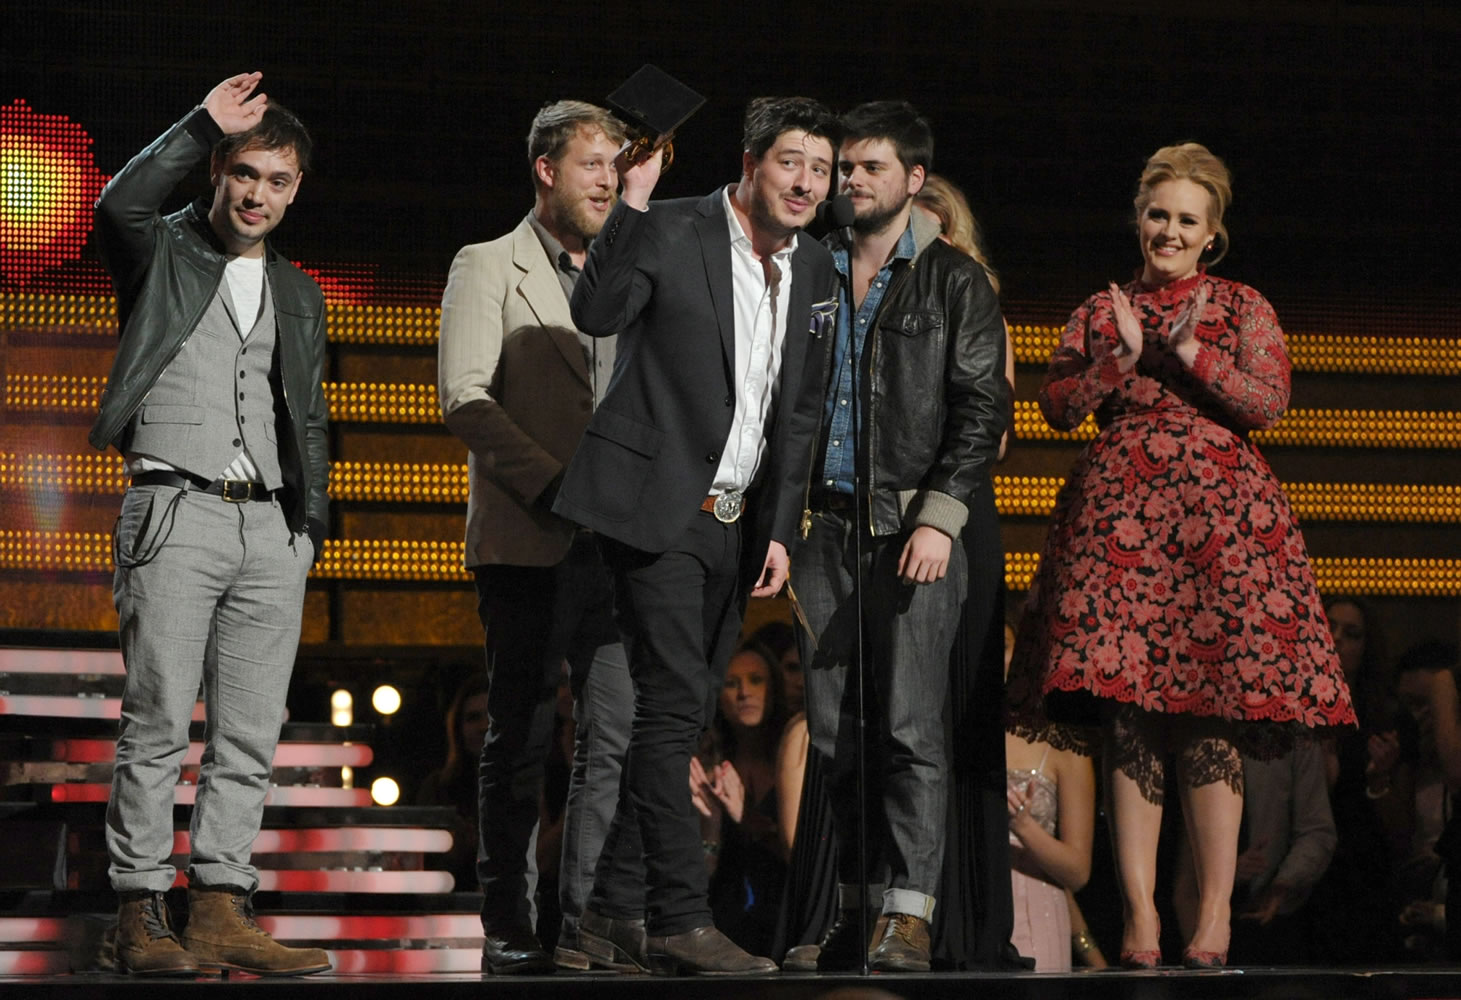 Mumford &amp; Sons, from left, Ben Lovett, Ted Dwayne, Marcus Mumford and Country Winston Marshall accept the award for album of the year for &quot;Babel&quot; at the 55th annual Grammy Awards on Sunday in Los Angeles.